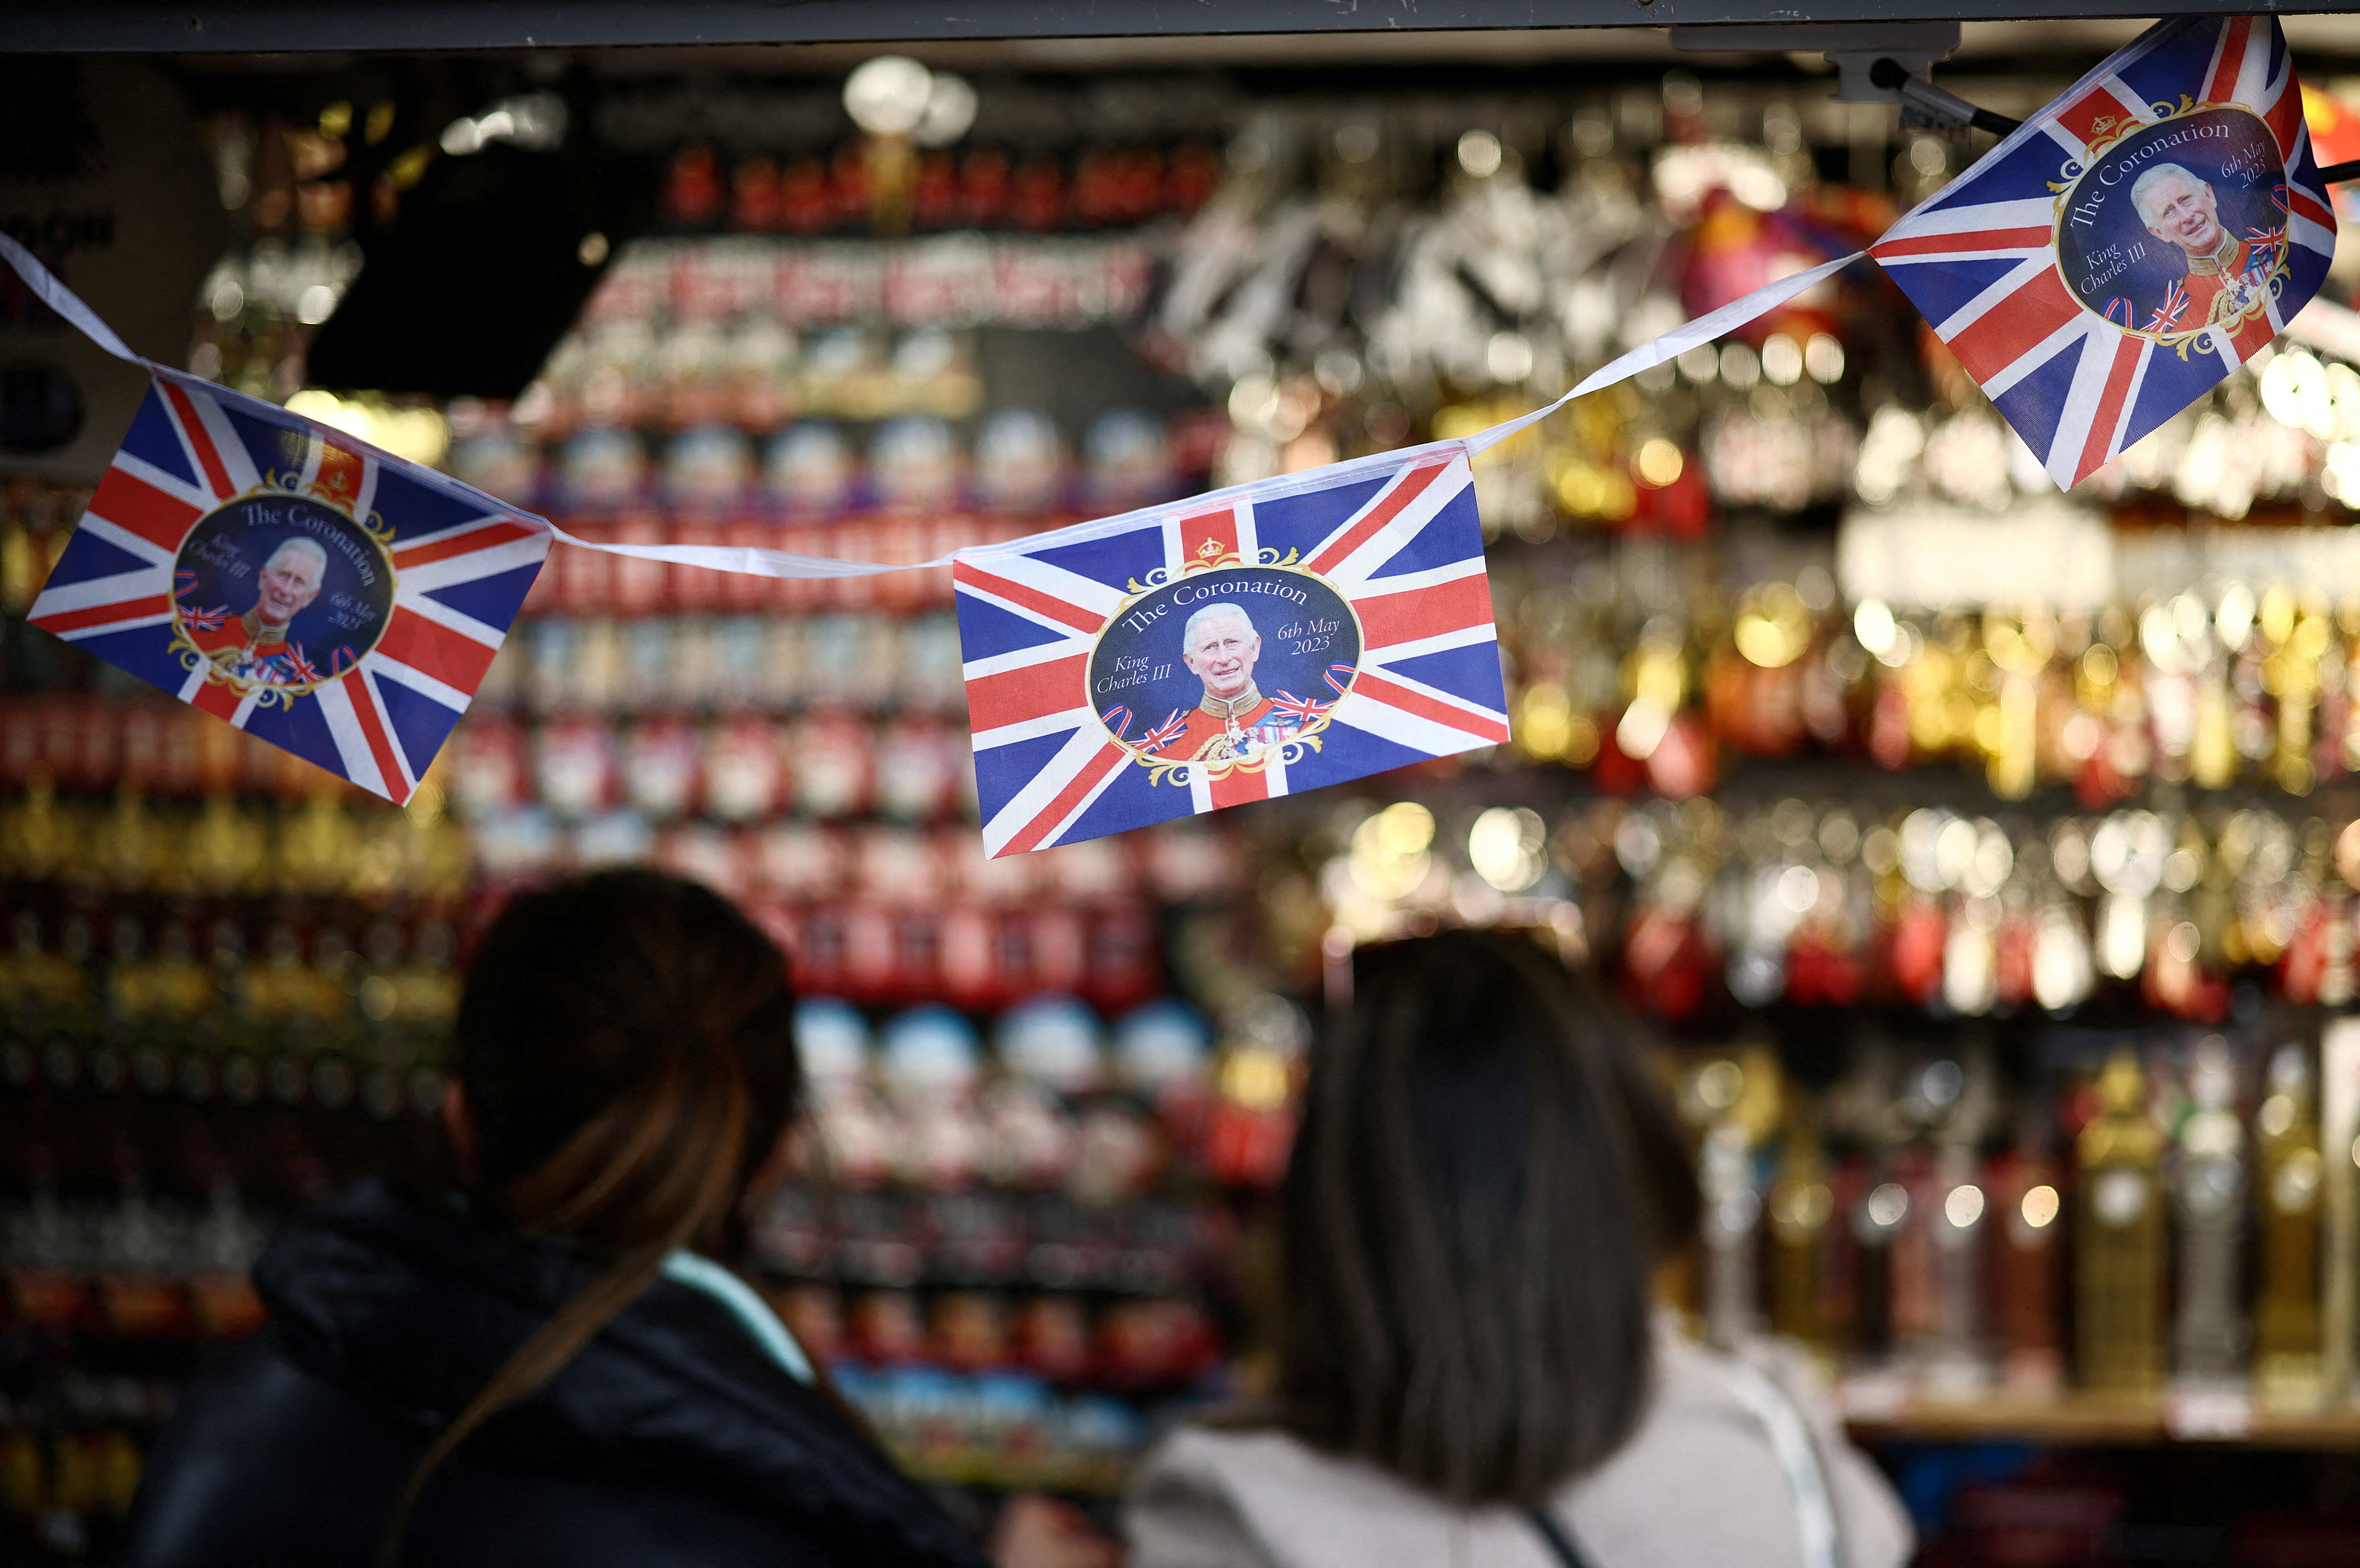 People browse a souvenir kiosk that is displaying items designed for the Coronation of King Charles III in London